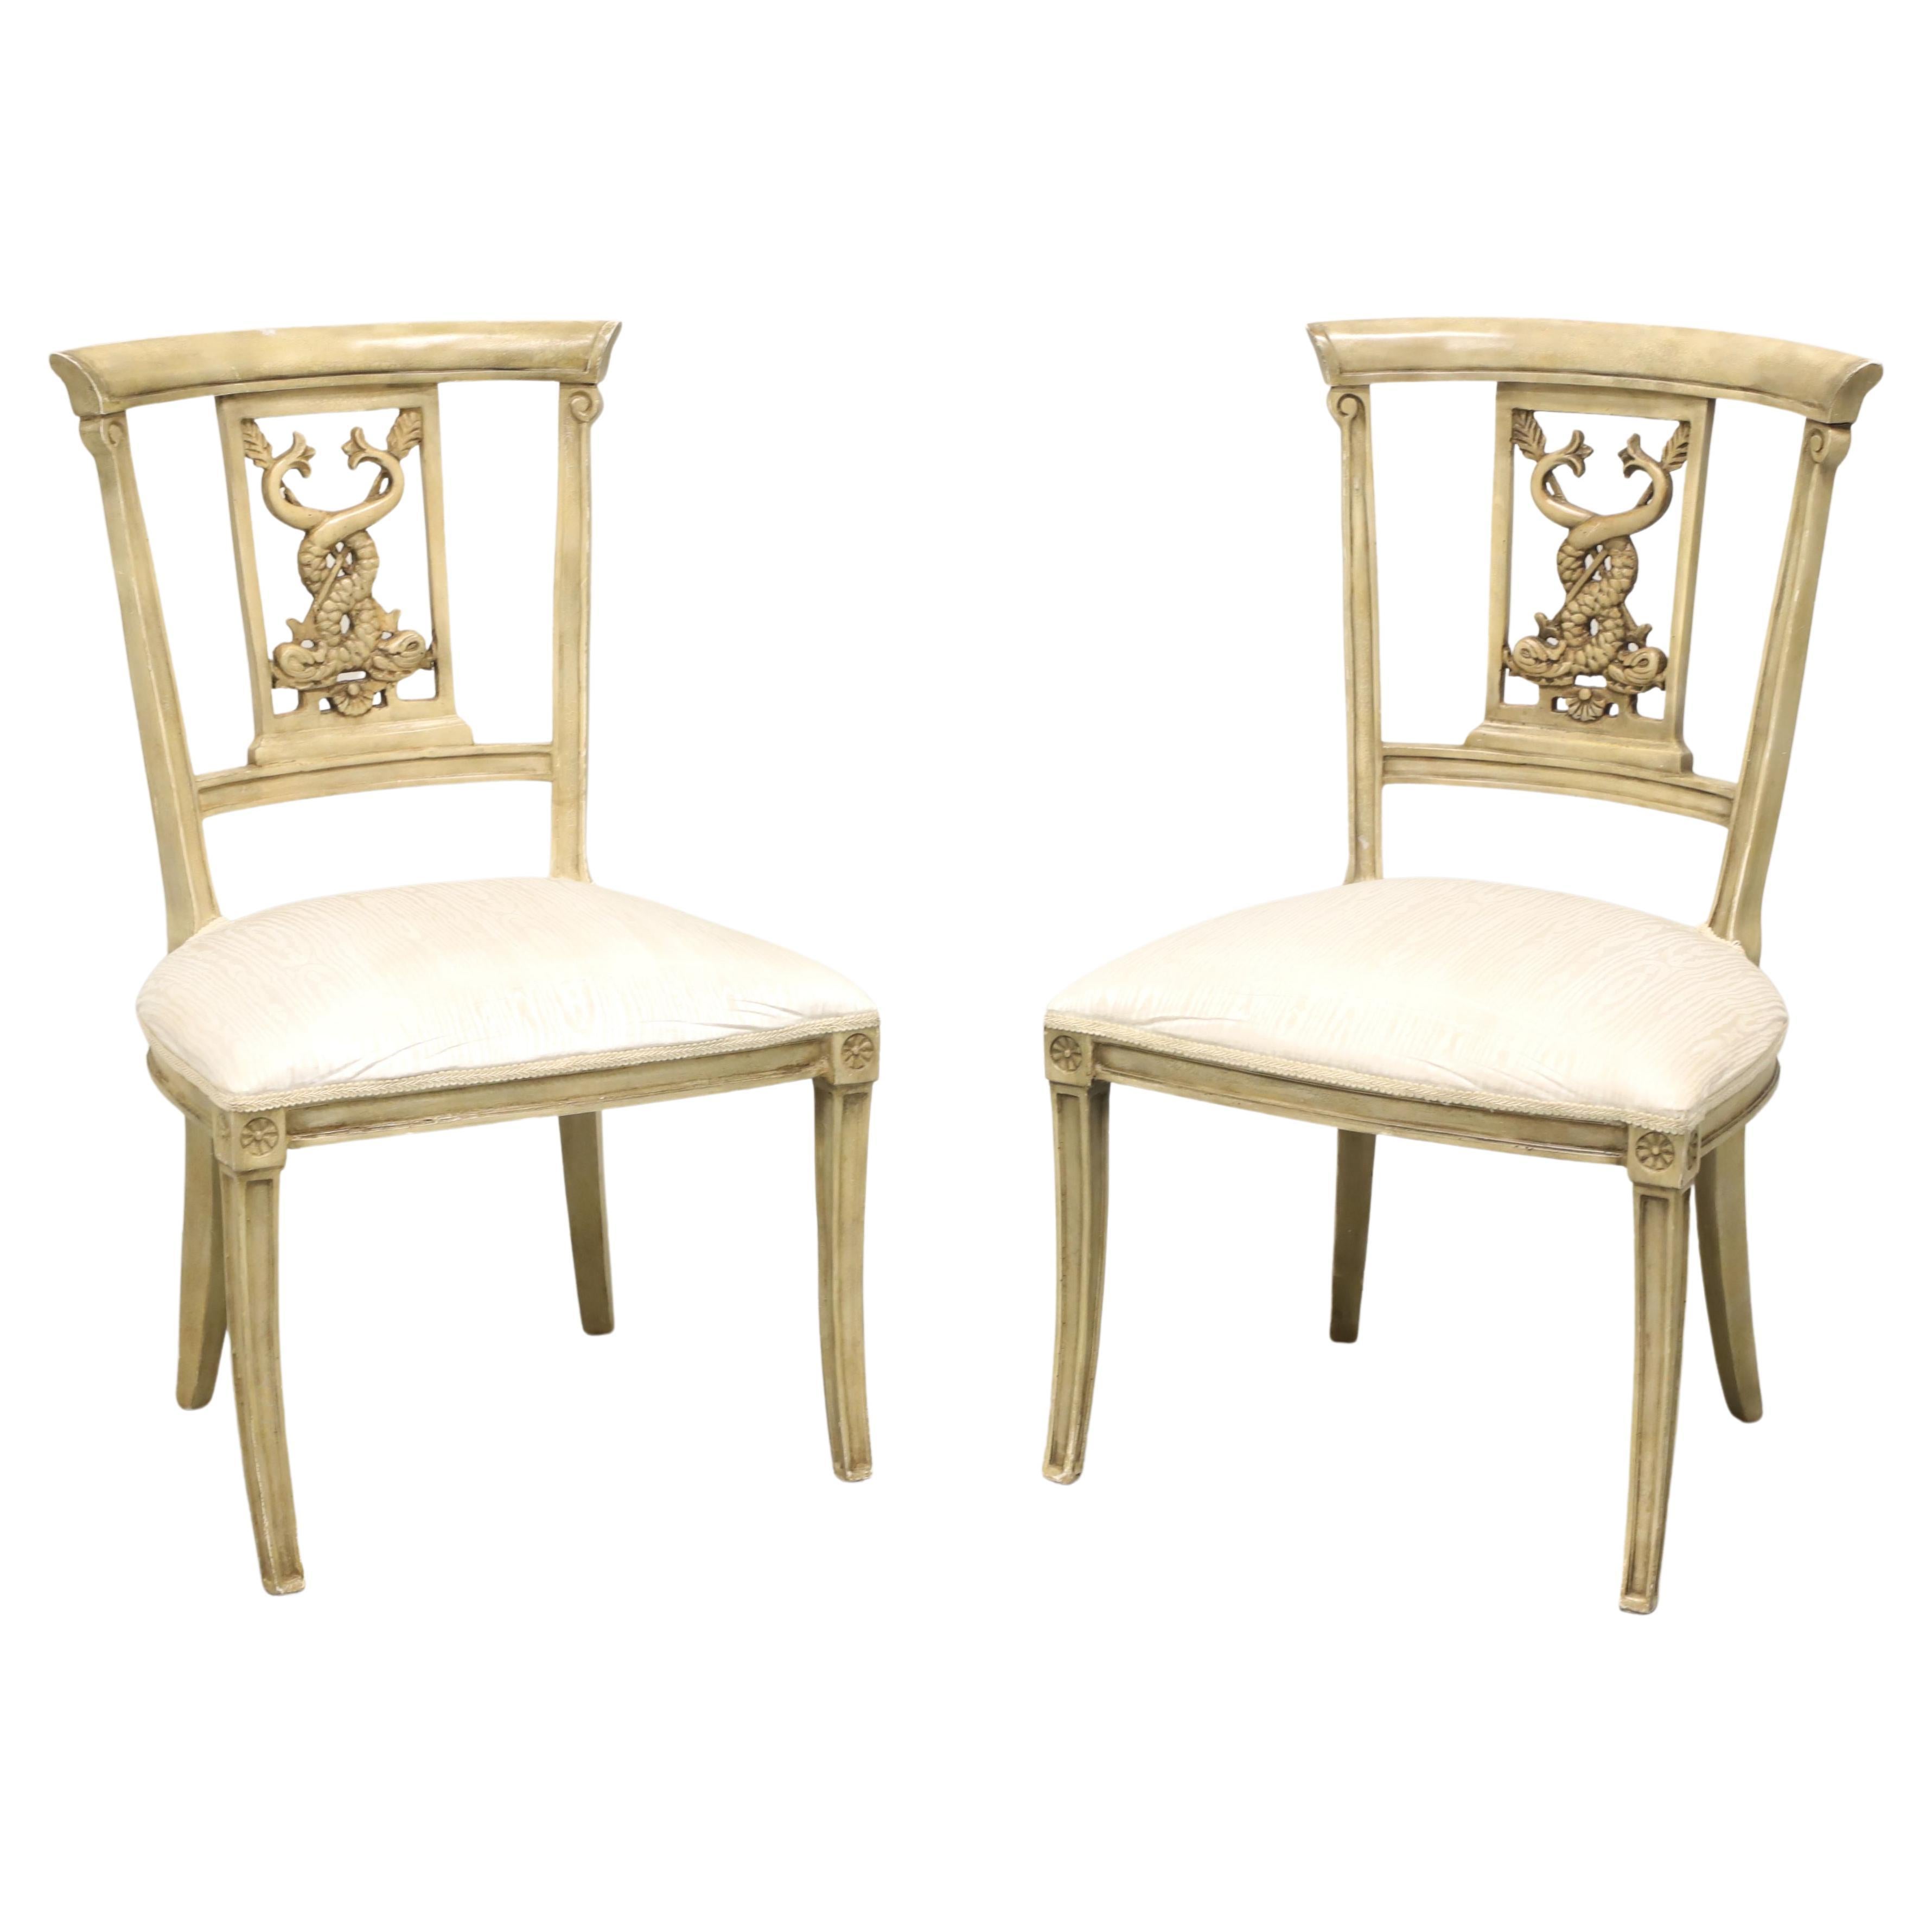 20th Century Italian Impero Style Side Chairs - Pair For Sale